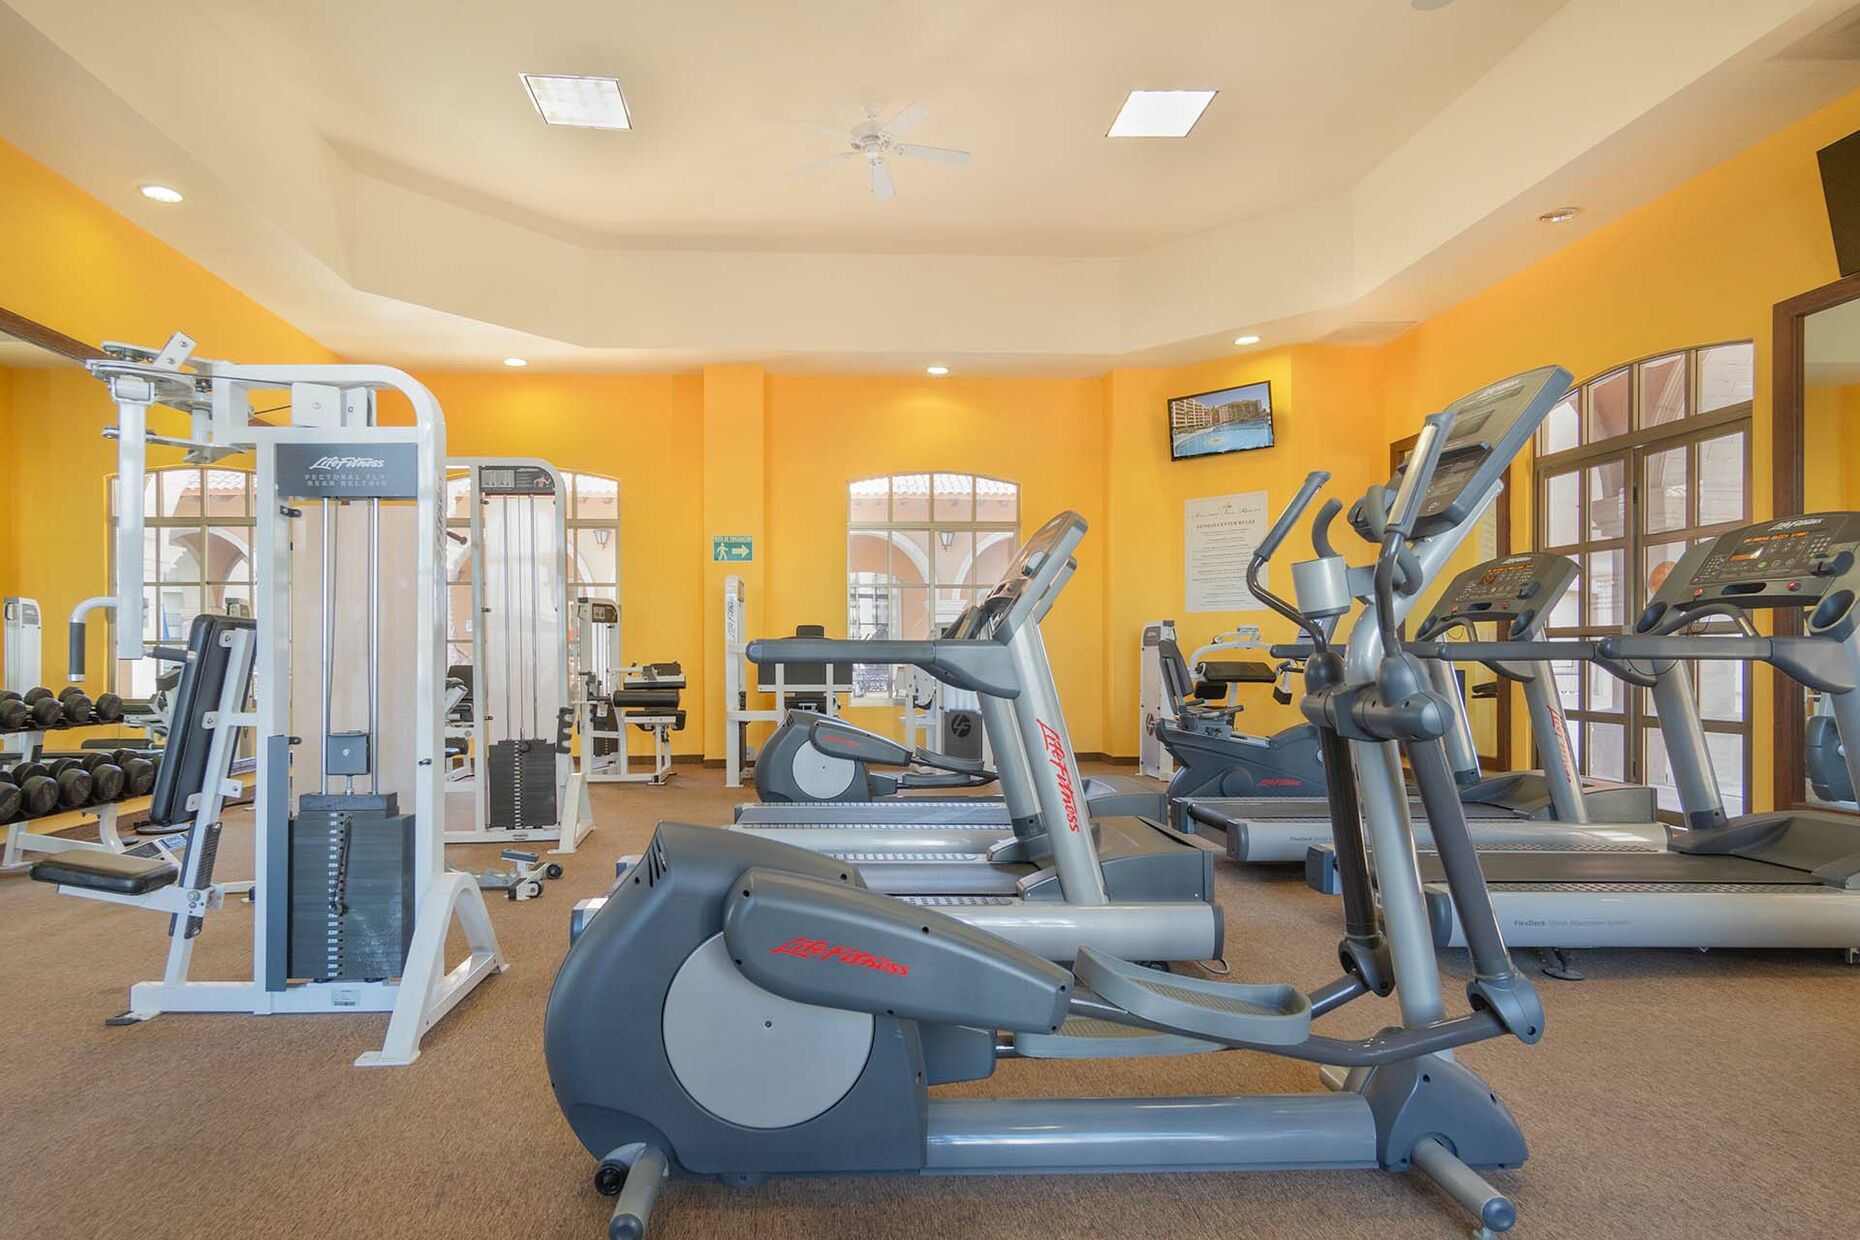 The workout room is fully stocked with weights, machines, as well as aerobic equipment.